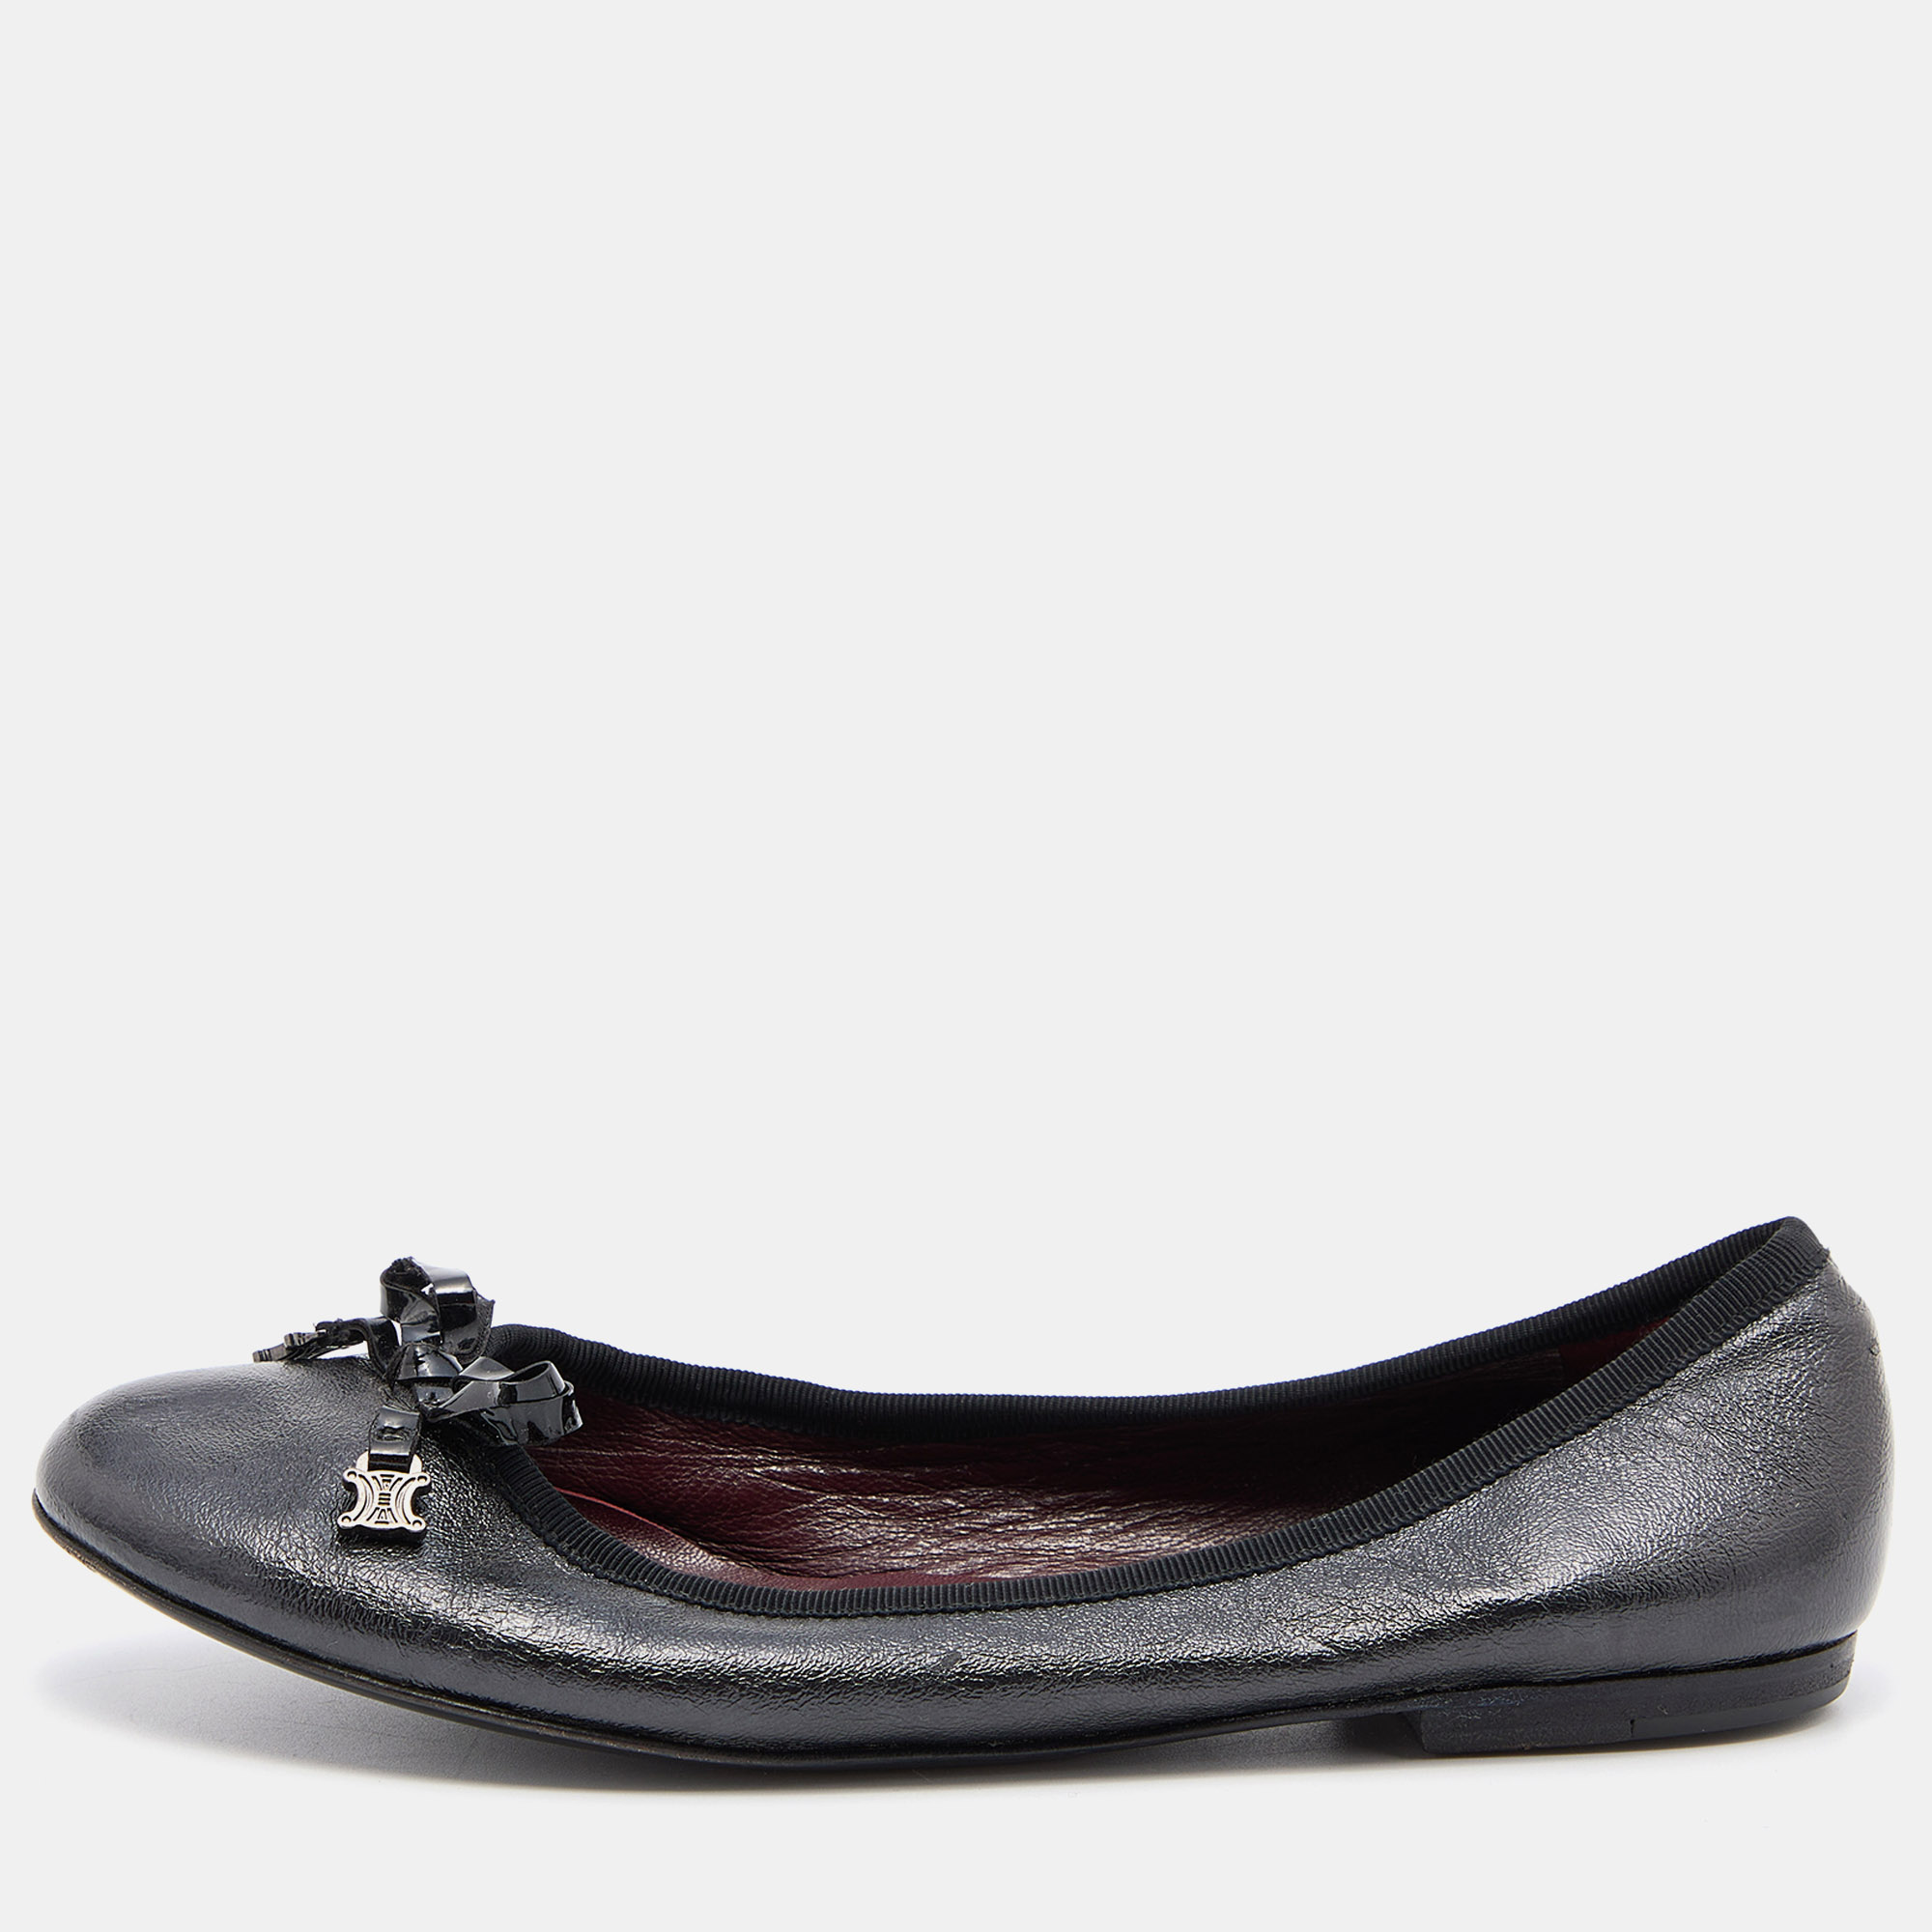 Pre-owned Celine Black Leather Bow Ballet Flats Size 36